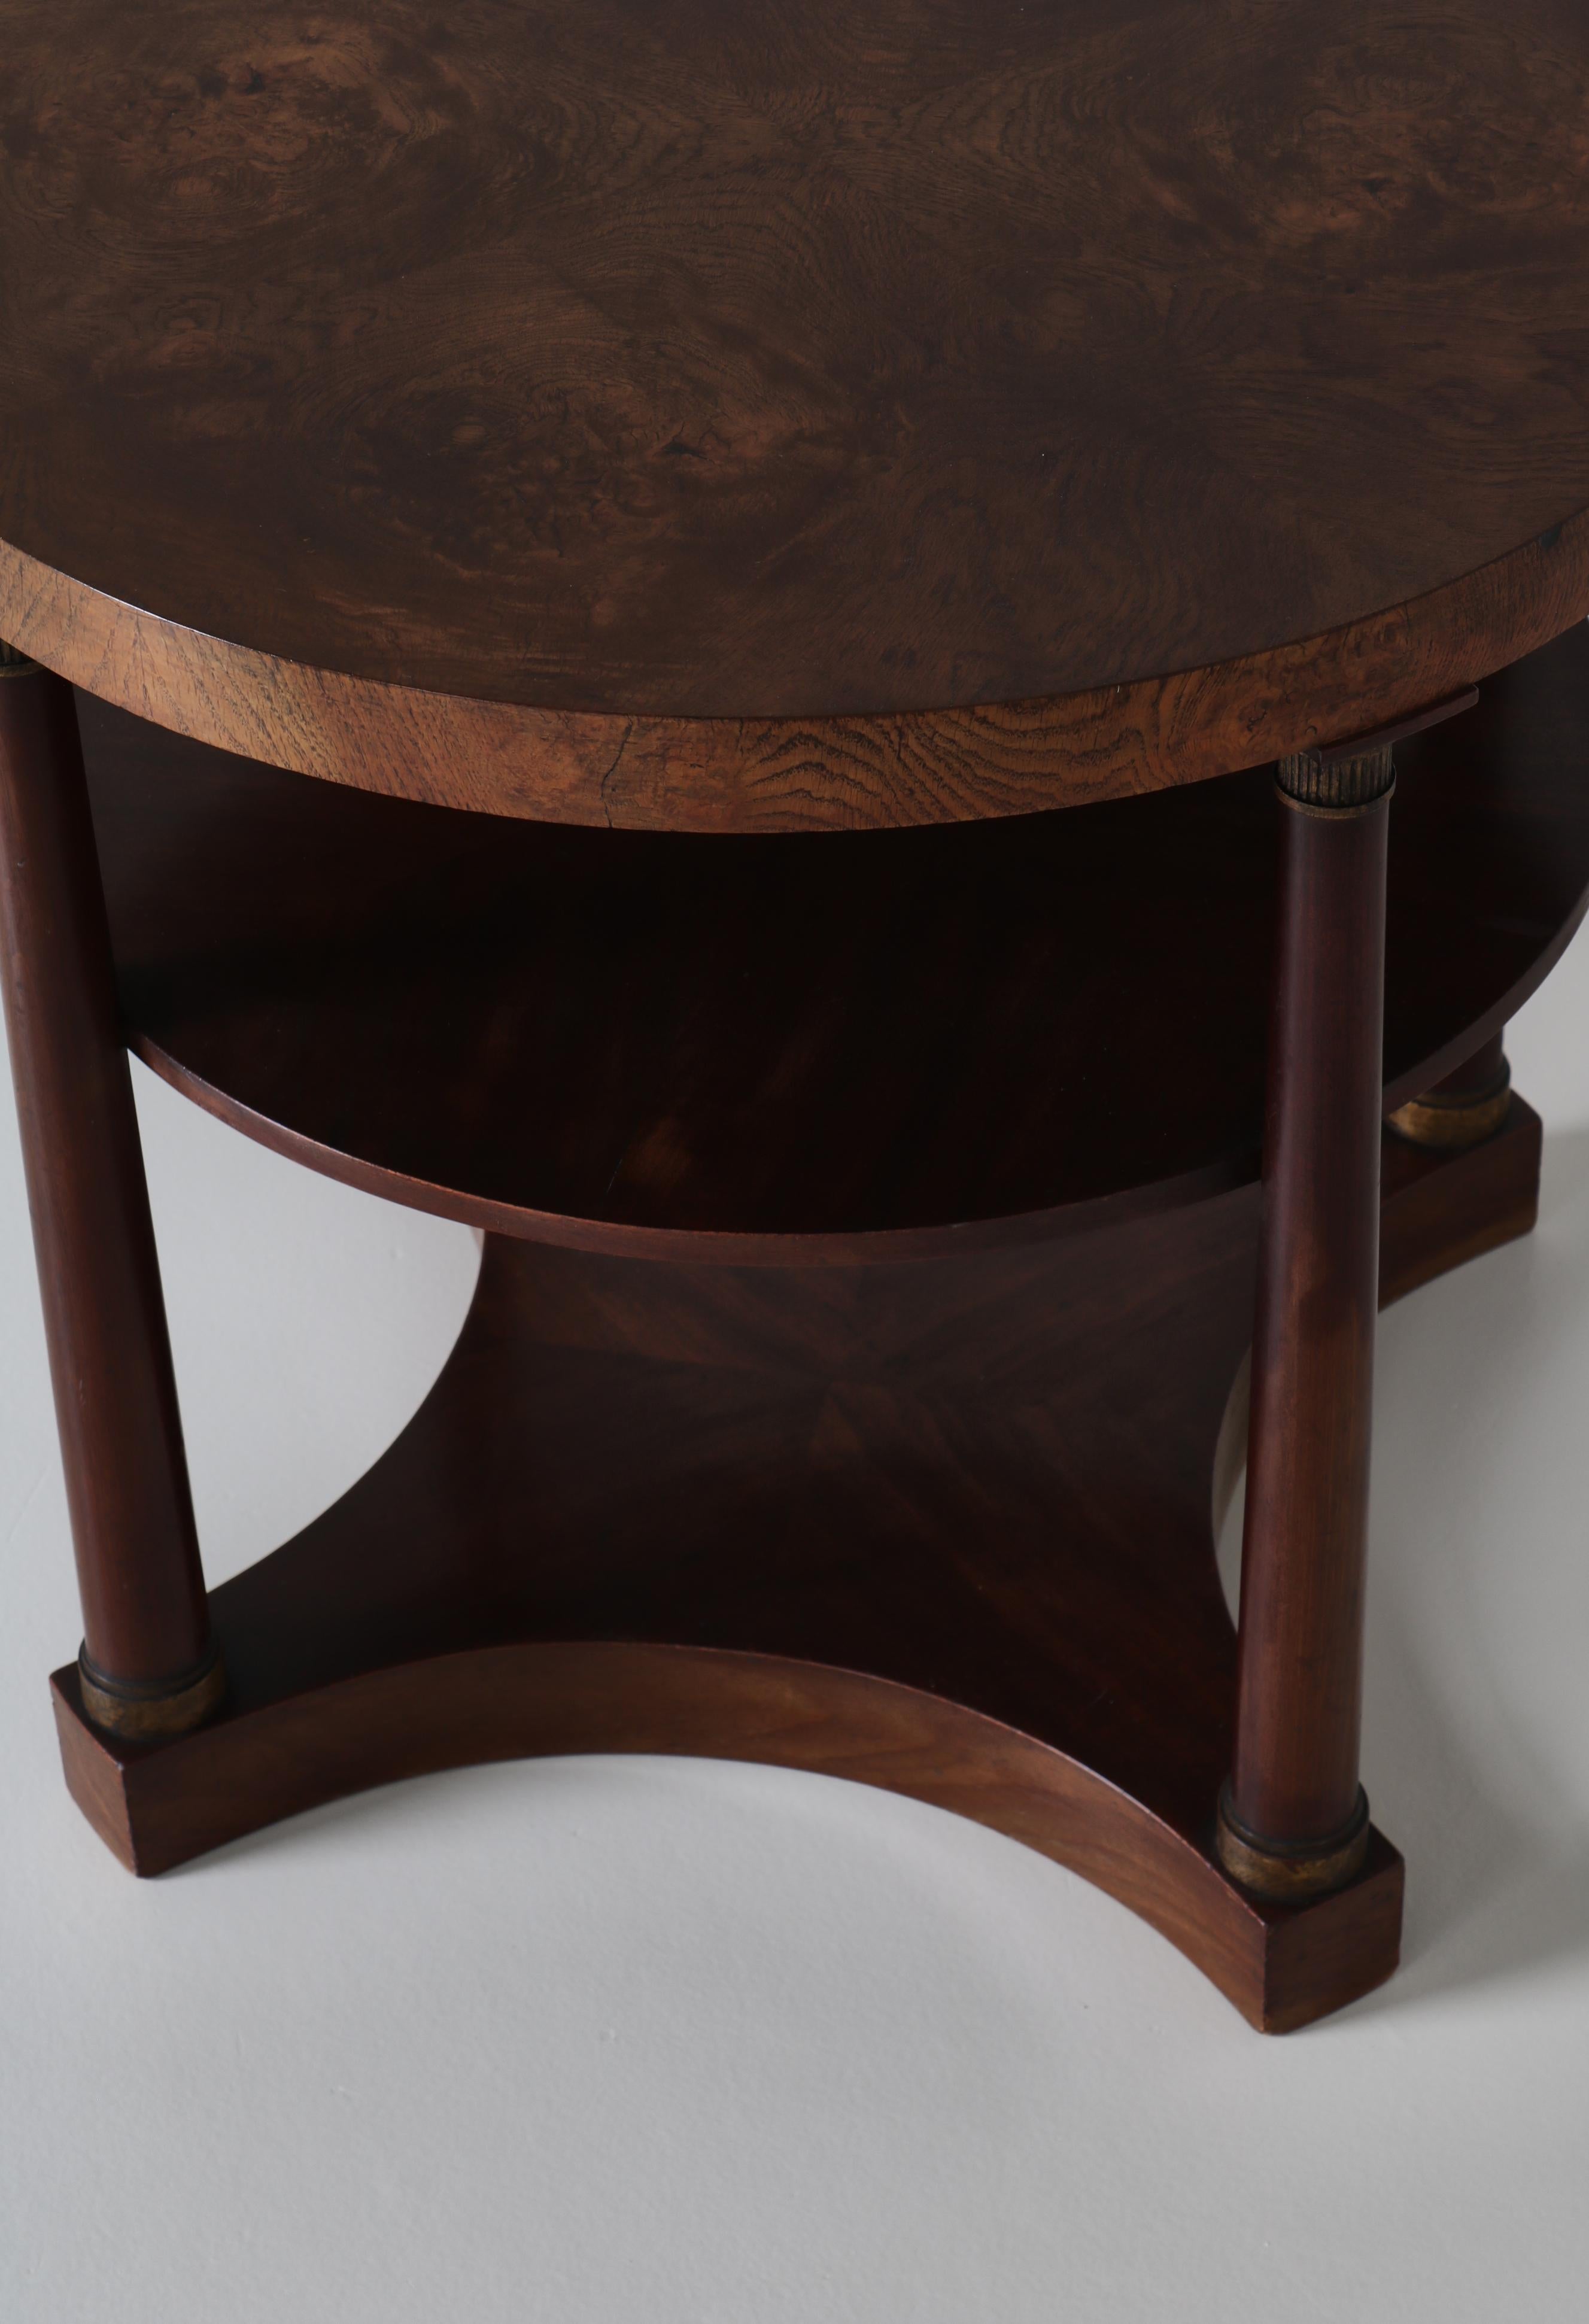 1930s Swedish Grace Occasional Table in Burl Wood Dark Stained, Art Deco For Sale 2